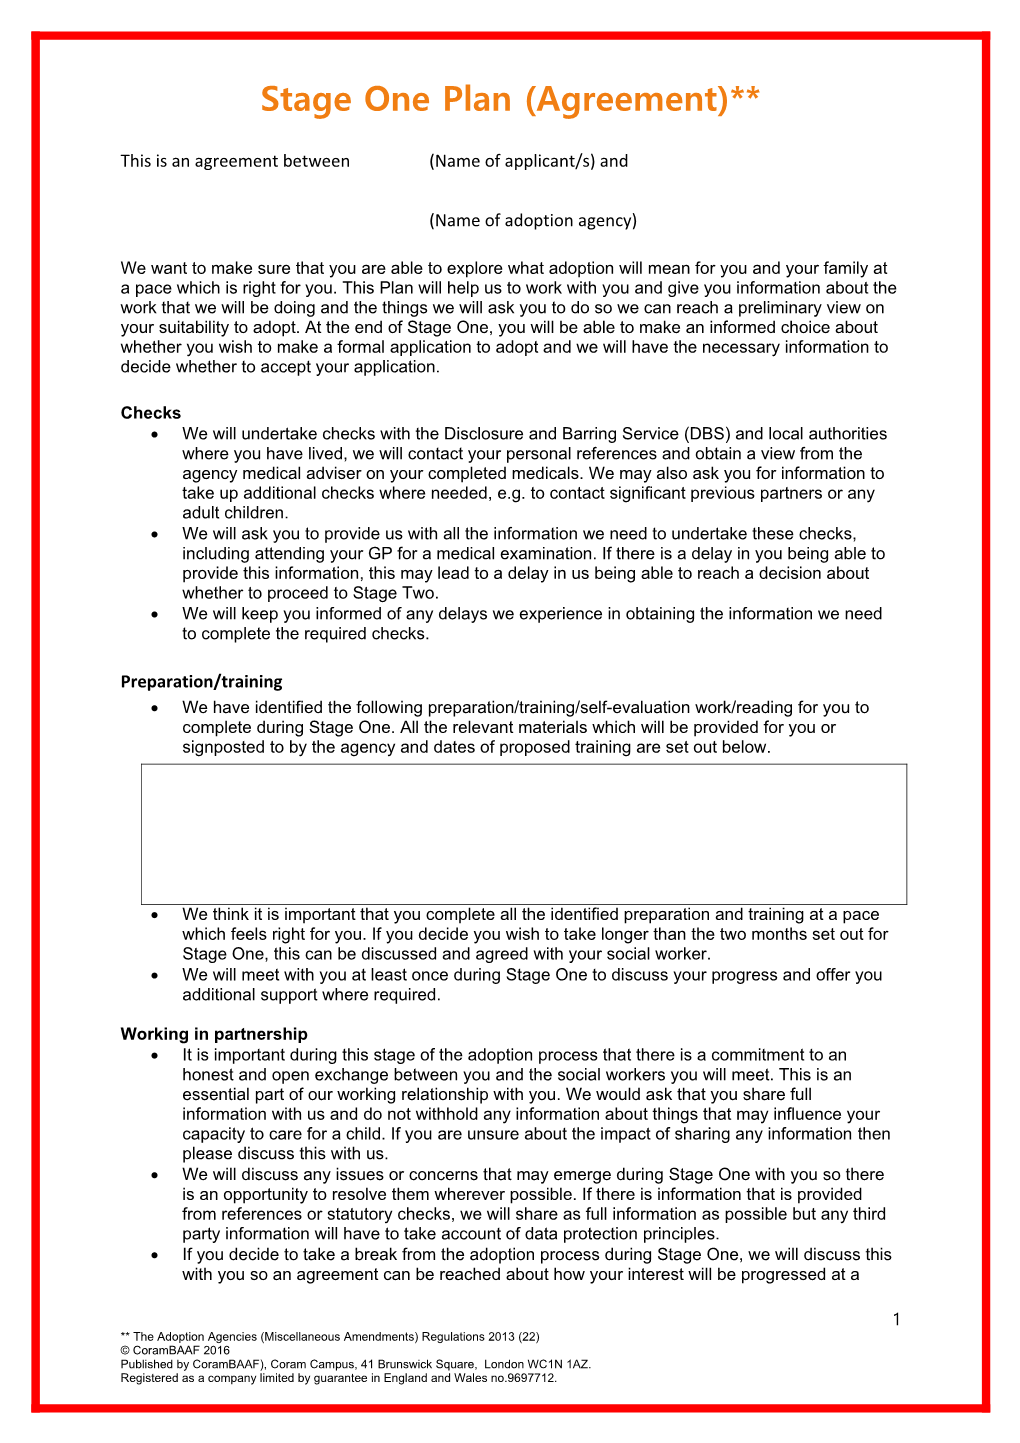 Stage One Agreement Form to Accompany PAR (England) January 2016